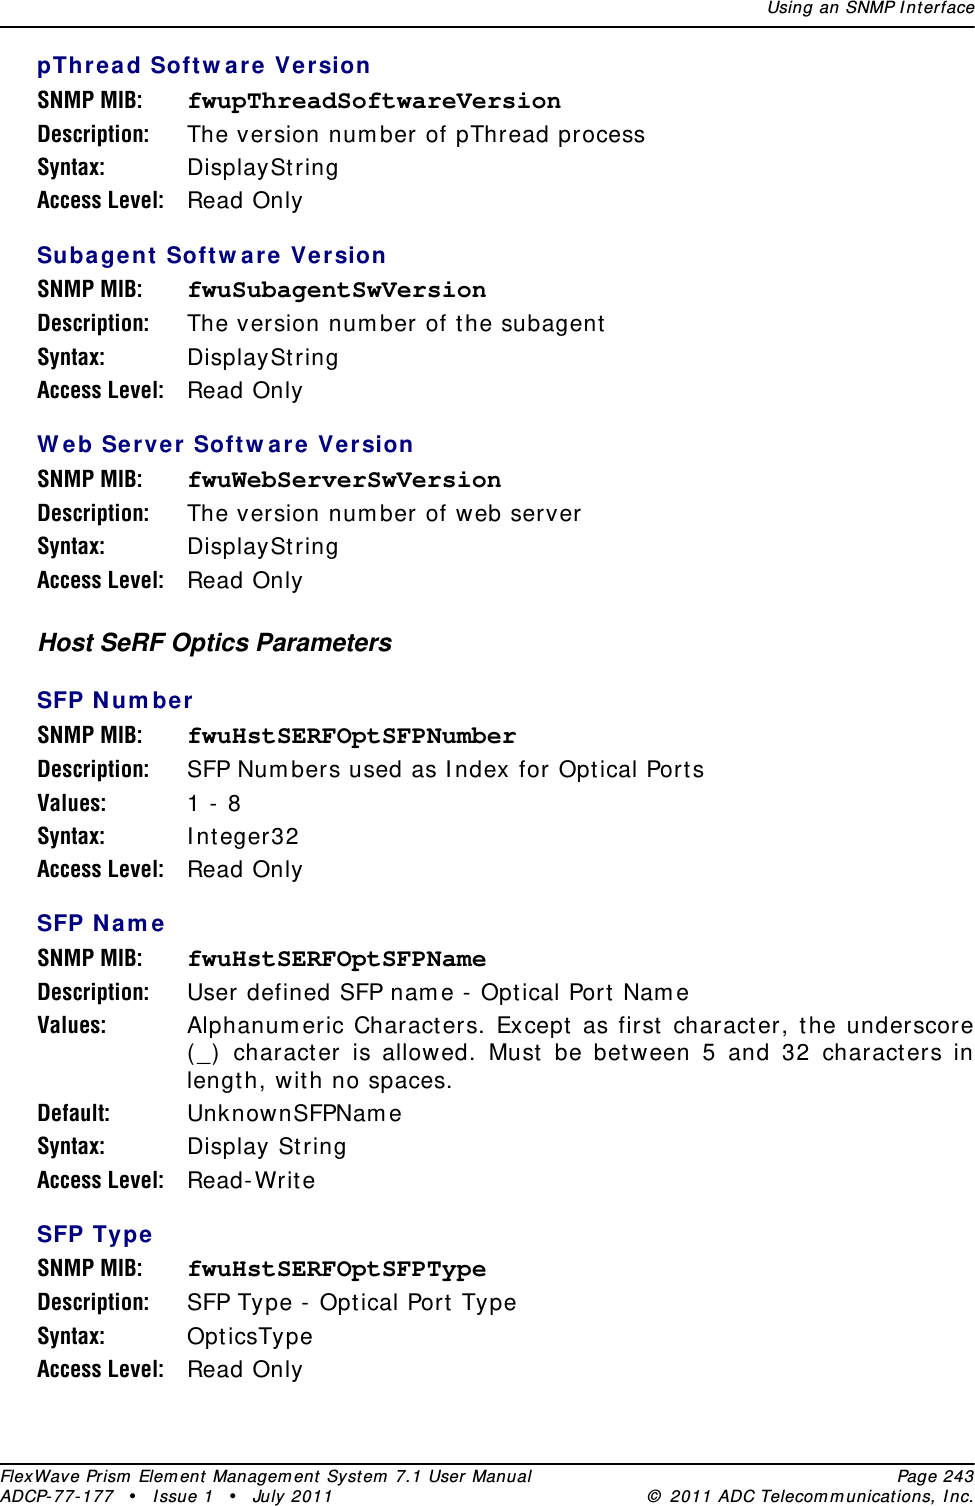 Using an SNMP I nt erfaceFlexWave Prism  Elem ent Managem ent  Syst em  7.1 User Manual Page 243ADCP- 77- 177  • I ssue 1 • July 2011 ©  2011 ADC Telecom m unicat ions, I nc.pTh rea d Soft w a re VersionSNMP MIB: fwupThreadSoftwareVersionDescription: The version num ber of pThread processSyntax: DisplaySt ringAccess Level: Read OnlySubagent  Softw ar e VersionSNMP MIB: fwuSubagentSwVersionDescription: The version num ber of t he subagentSyntax: DisplaySt ringAccess Level: Read OnlyW e b Server  Softw are  VersionSNMP MIB: fwuWebServerSwVersionDescription: The version num ber of web serverSyntax: DisplaySt ringAccess Level: Read OnlyHost SeRF Optics ParametersSFP Num be rSNMP MIB: fwuHstSERFOptSFPNumberDescription: SFP Num bers used as I ndex for Opt ical Port sValues: 1 -  8Syntax: I nt eger32 Access Level: Read OnlySFP Nam eSNMP MIB: fwuHstSERFOptSFPNameDescription: User defined SFP nam e - Opt ical Port  Nam eValues: Alphanum eric Charact ers. Except  as first  character, t he underscore ( _)  charact er is allowed. Must be between 5 and 32 characters in lengt h, wit h no spaces.Default: UnknownSFPNam eSyntax: Display StringAccess Level: Read- Writ eSFP TypeSNMP MIB: fwuHstSERFOptSFPTypeDescription: SFP Type - Opt ical Port TypeSyntax: Opt icsTypeAccess Level: Read Only